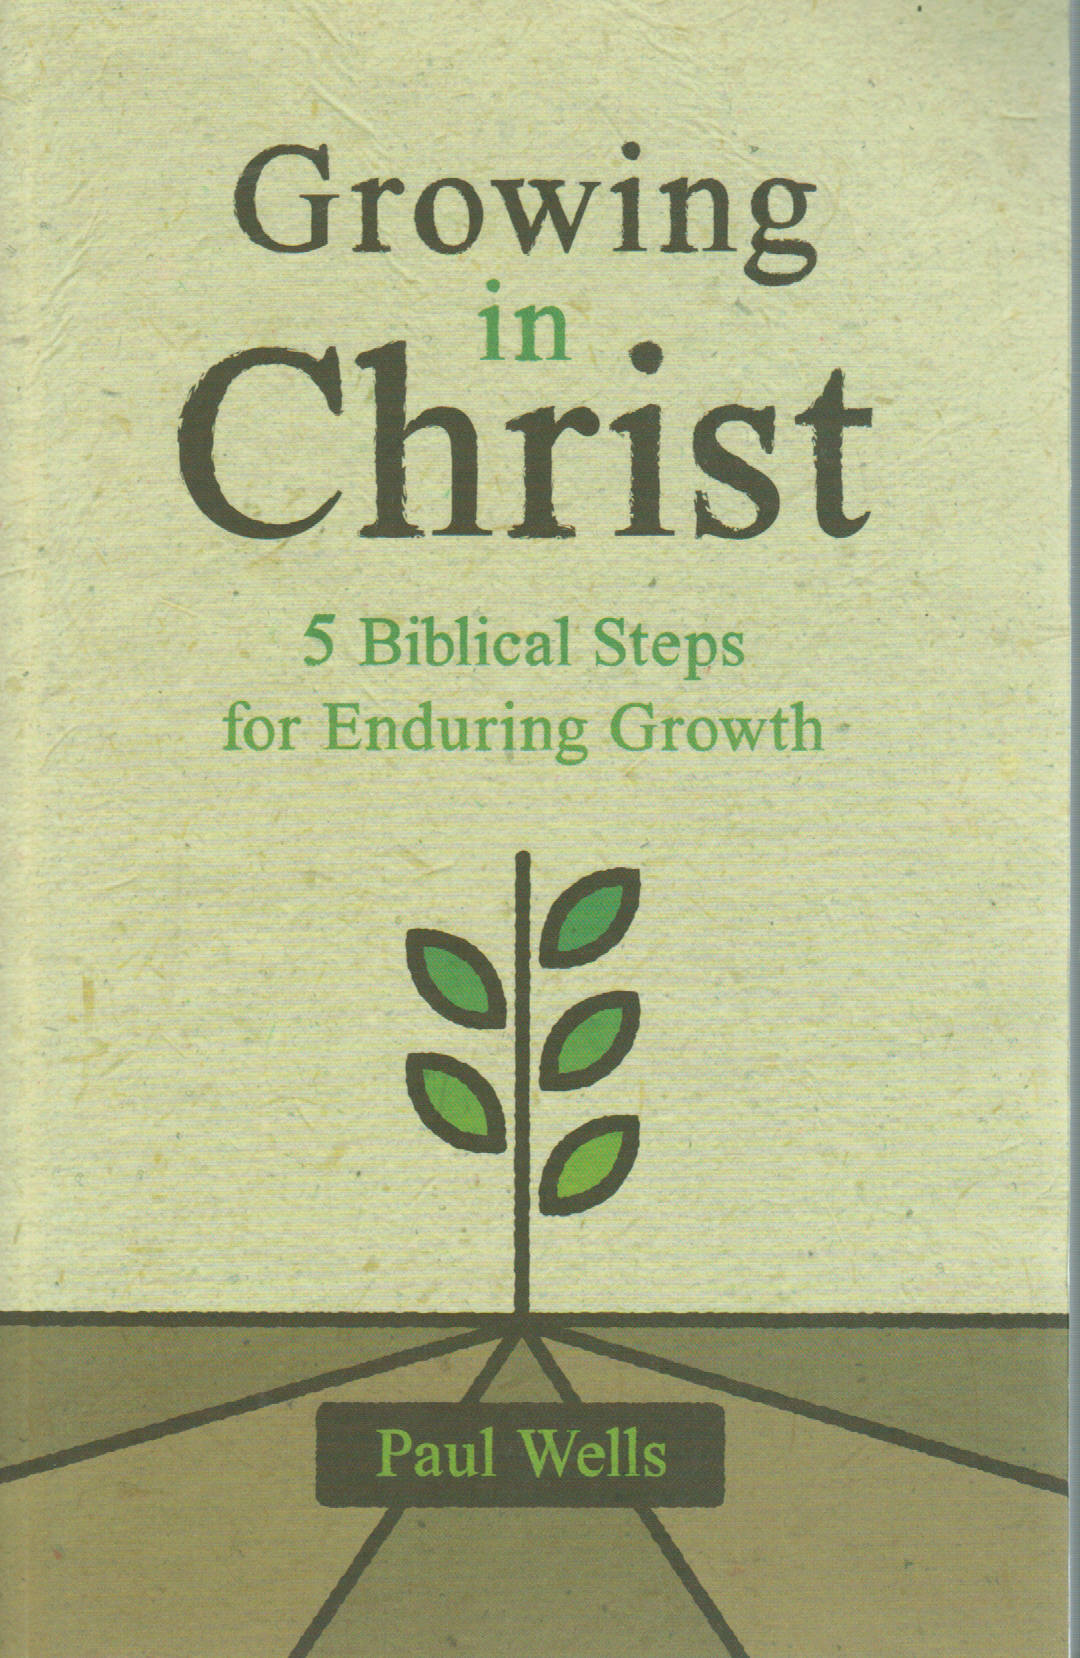 Growing in Christ: 5 Biblical Steps for Enduring Growth